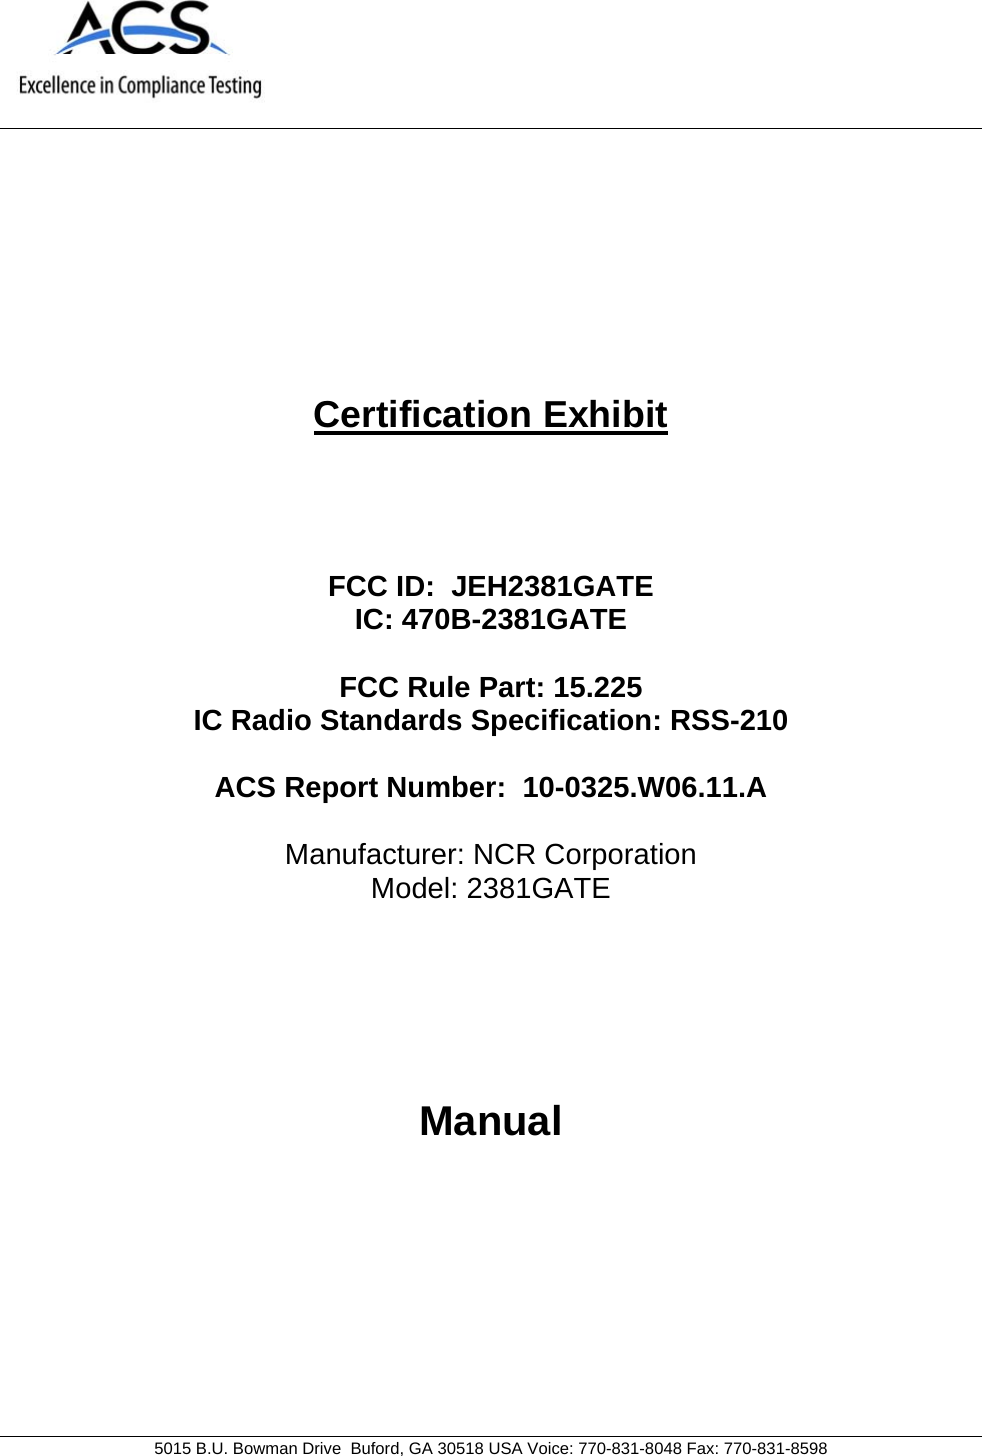     5015 B.U. Bowman Drive  Buford, GA 30518 USA Voice: 770-831-8048 Fax: 770-831-8598   Certification Exhibit     FCC ID:  JEH2381GATE IC: 470B-2381GATE  FCC Rule Part: 15.225 IC Radio Standards Specification: RSS-210  ACS Report Number:  10-0325.W06.11.A   Manufacturer: NCR Corporation Model: 2381GATE     Manual  